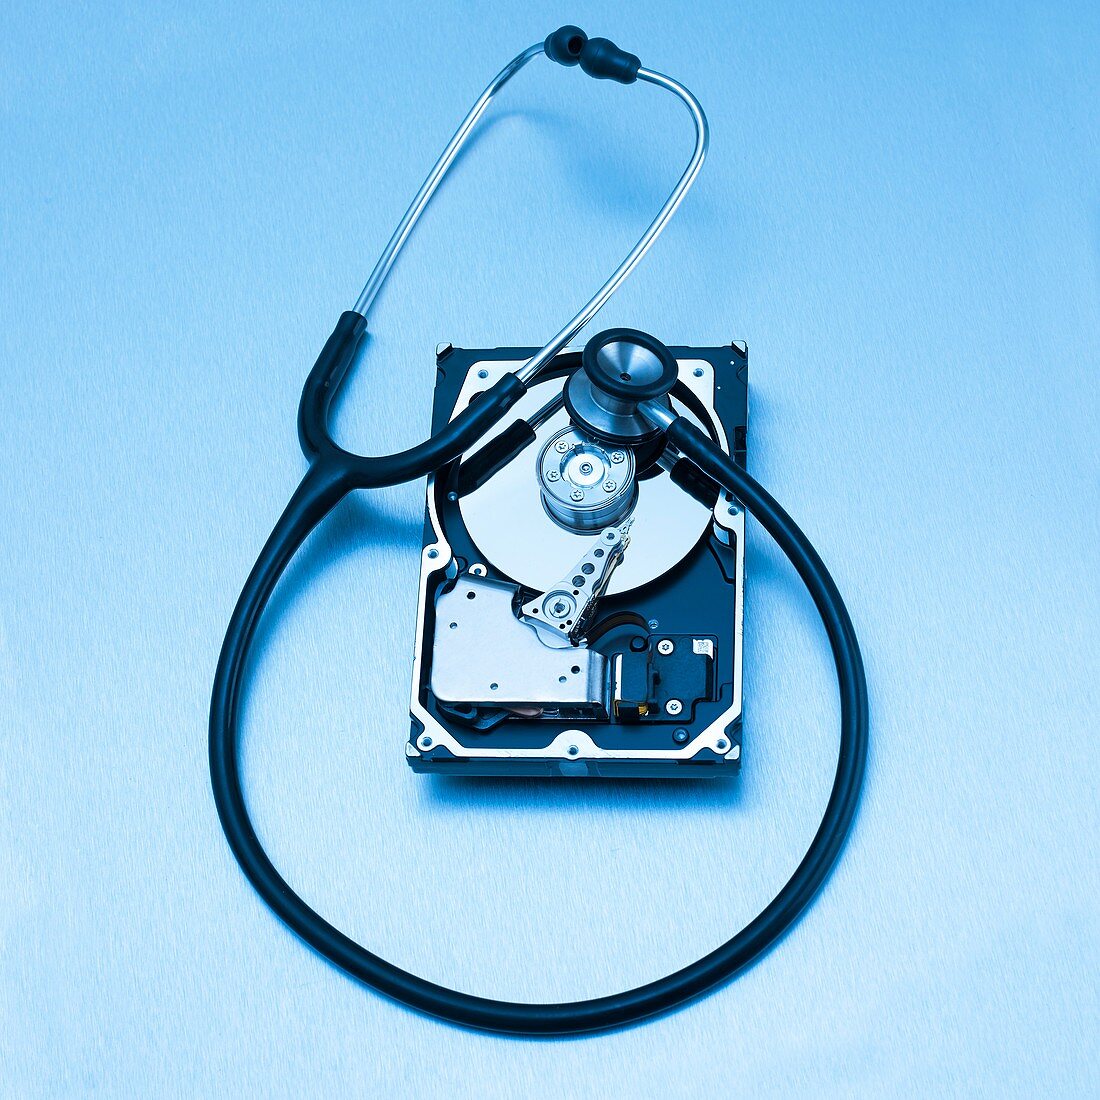 Computer hard drive and stethoscope